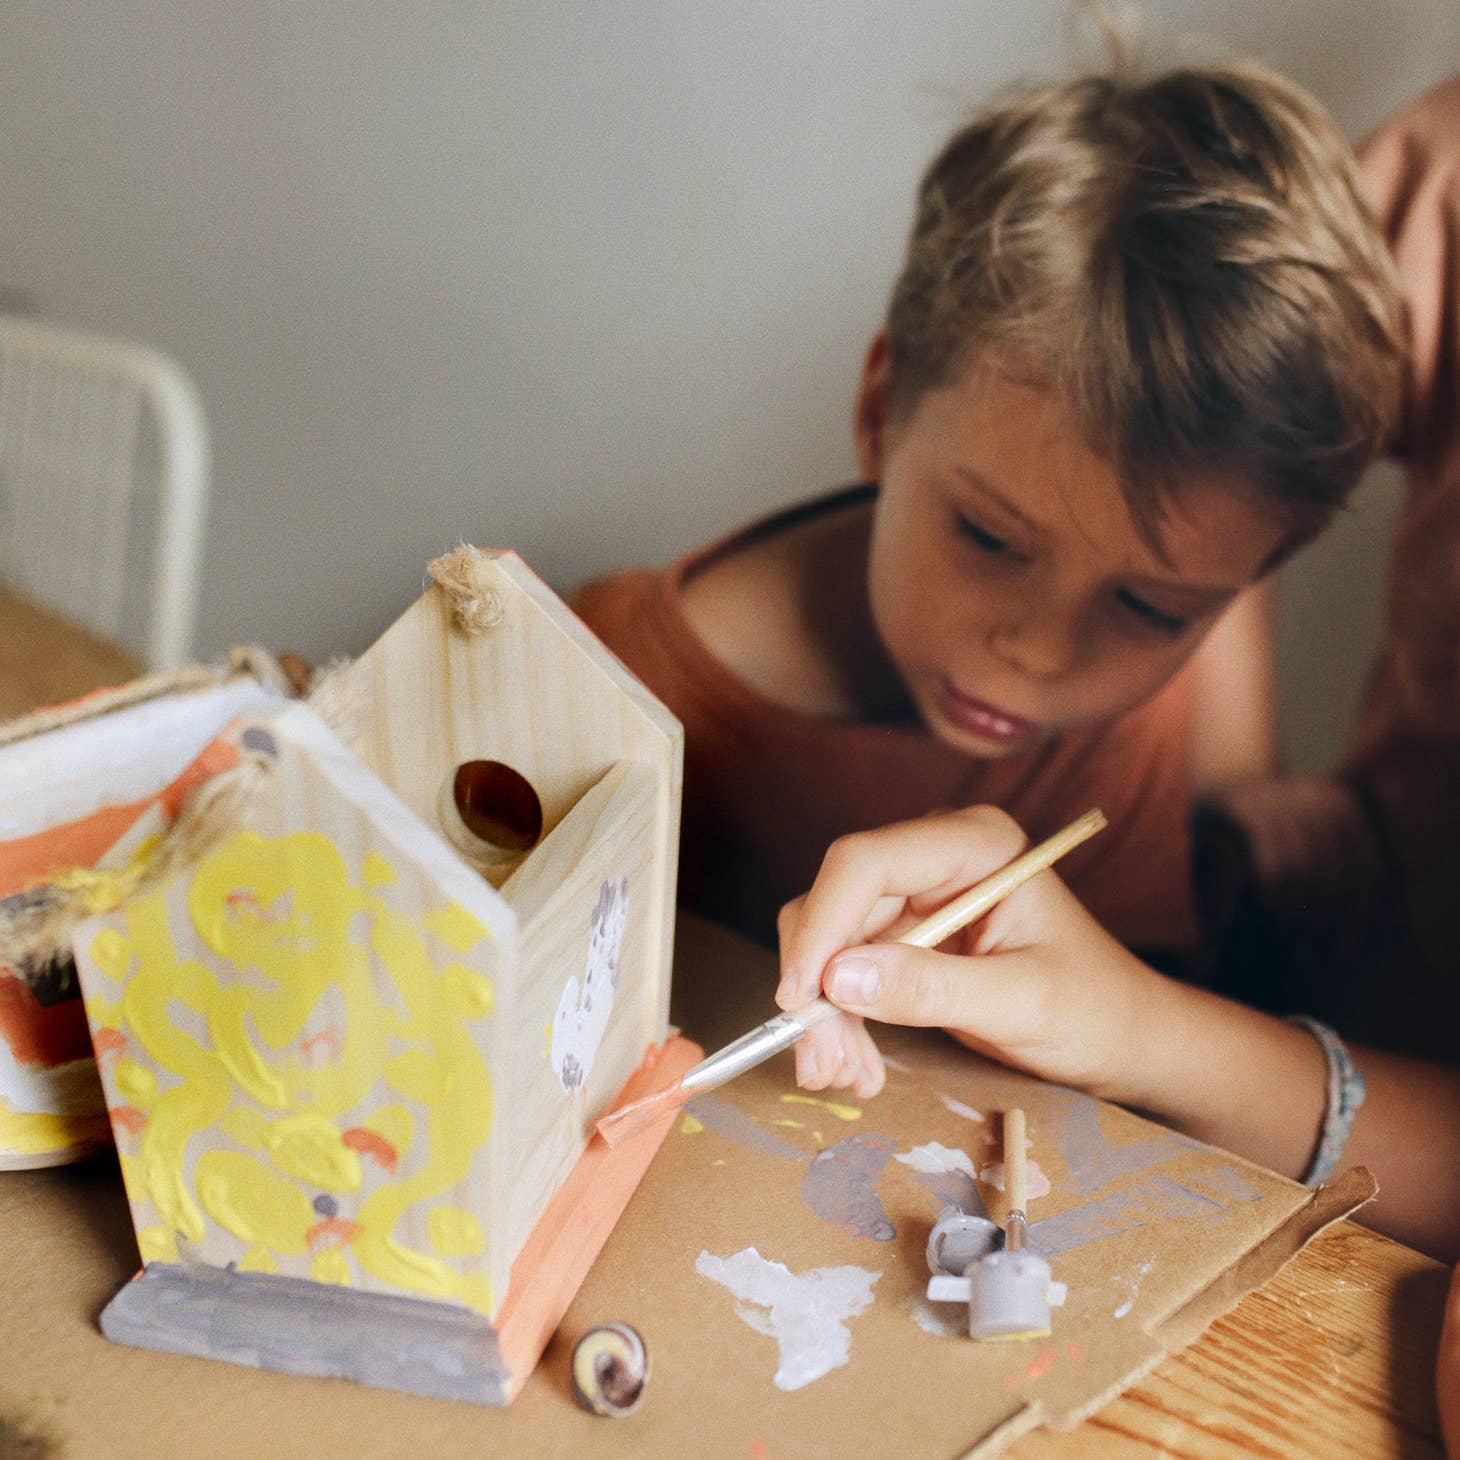 Kinderfeets Birdhouse with Paint & Brushes